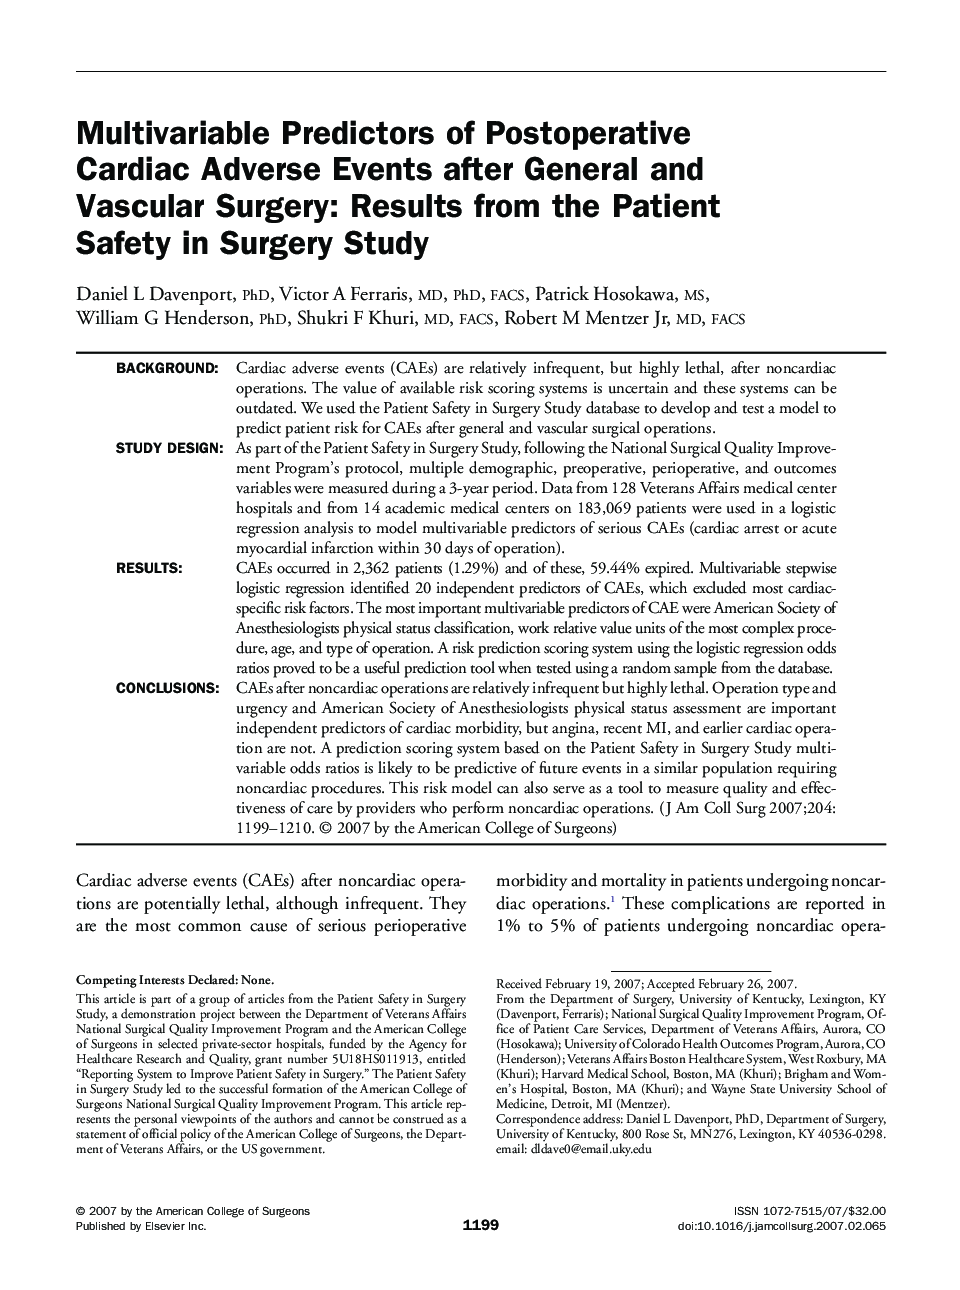 Multivariable Predictors of Postoperative Cardiac Adverse Events after General and Vascular Surgery: Results from the Patient Safety in Surgery Study 